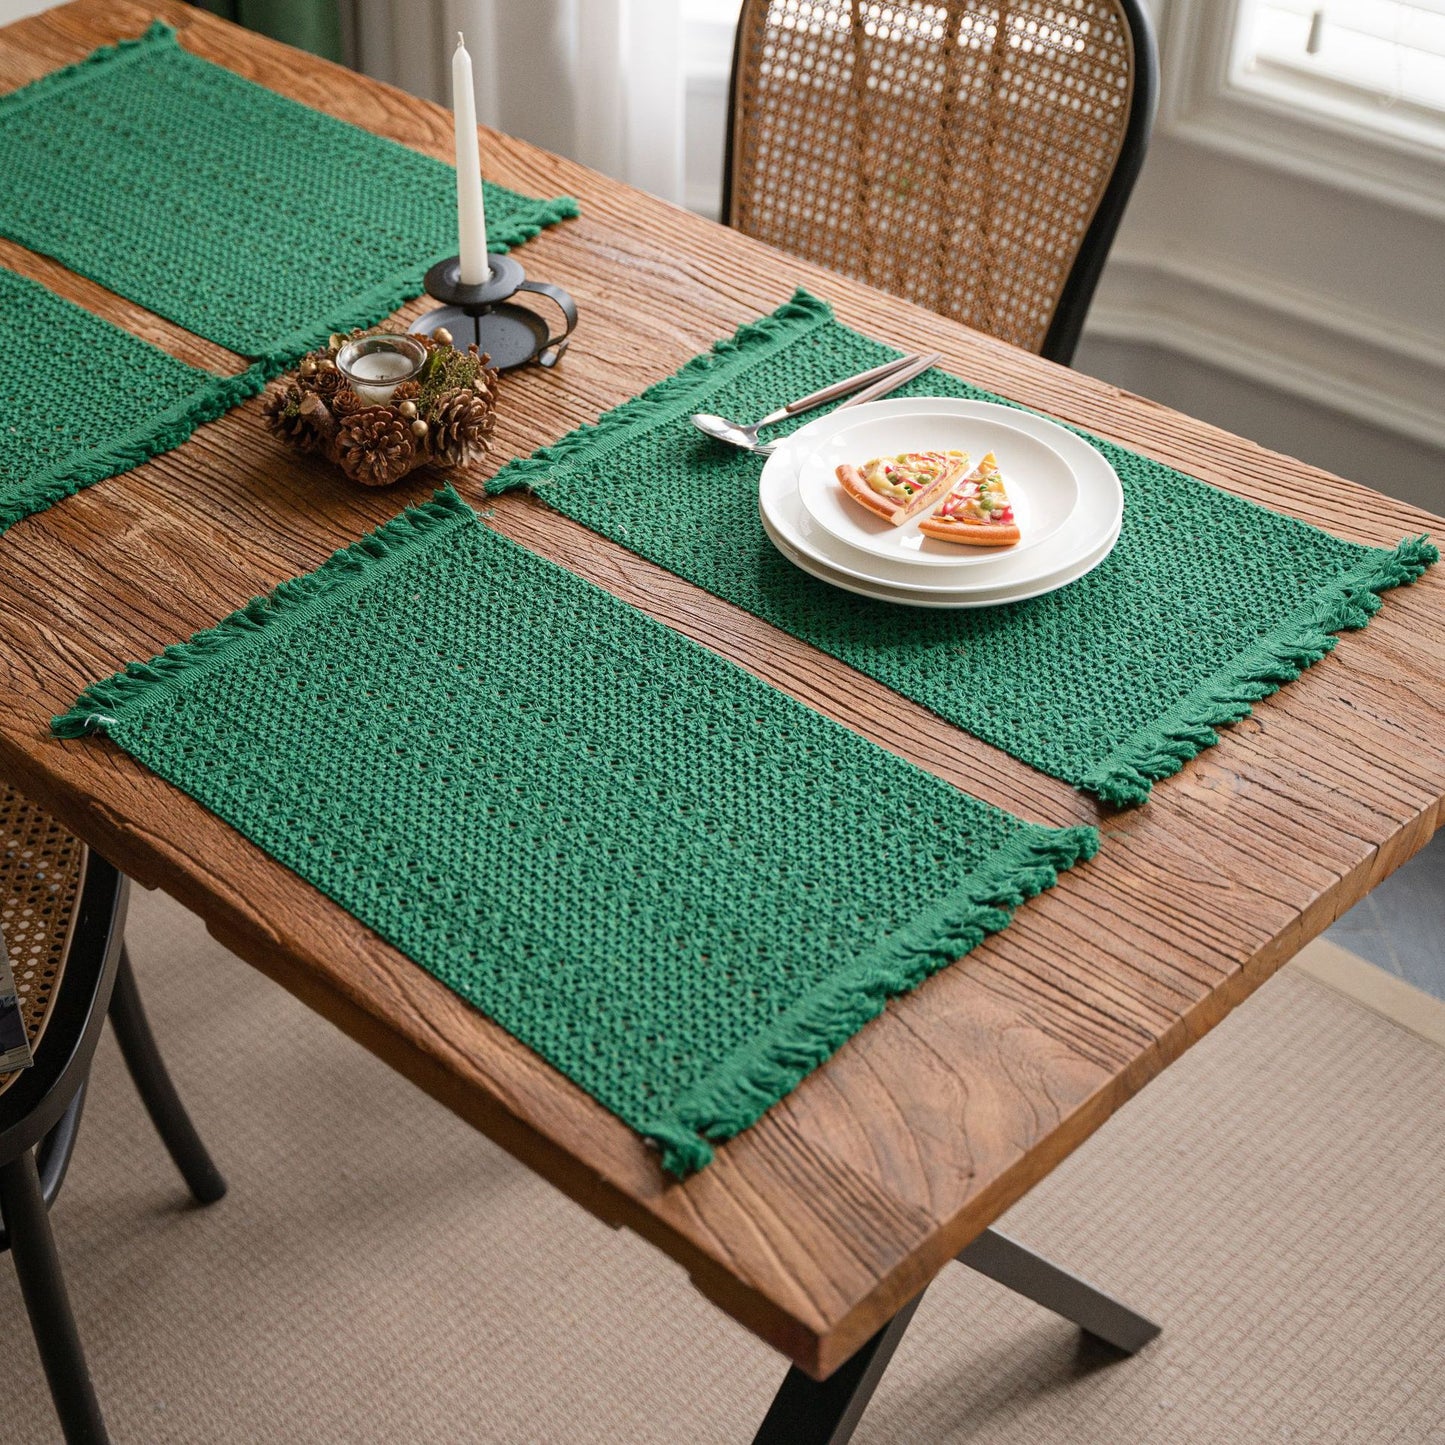 Flax Woven Striped Tassel Festive Placemat